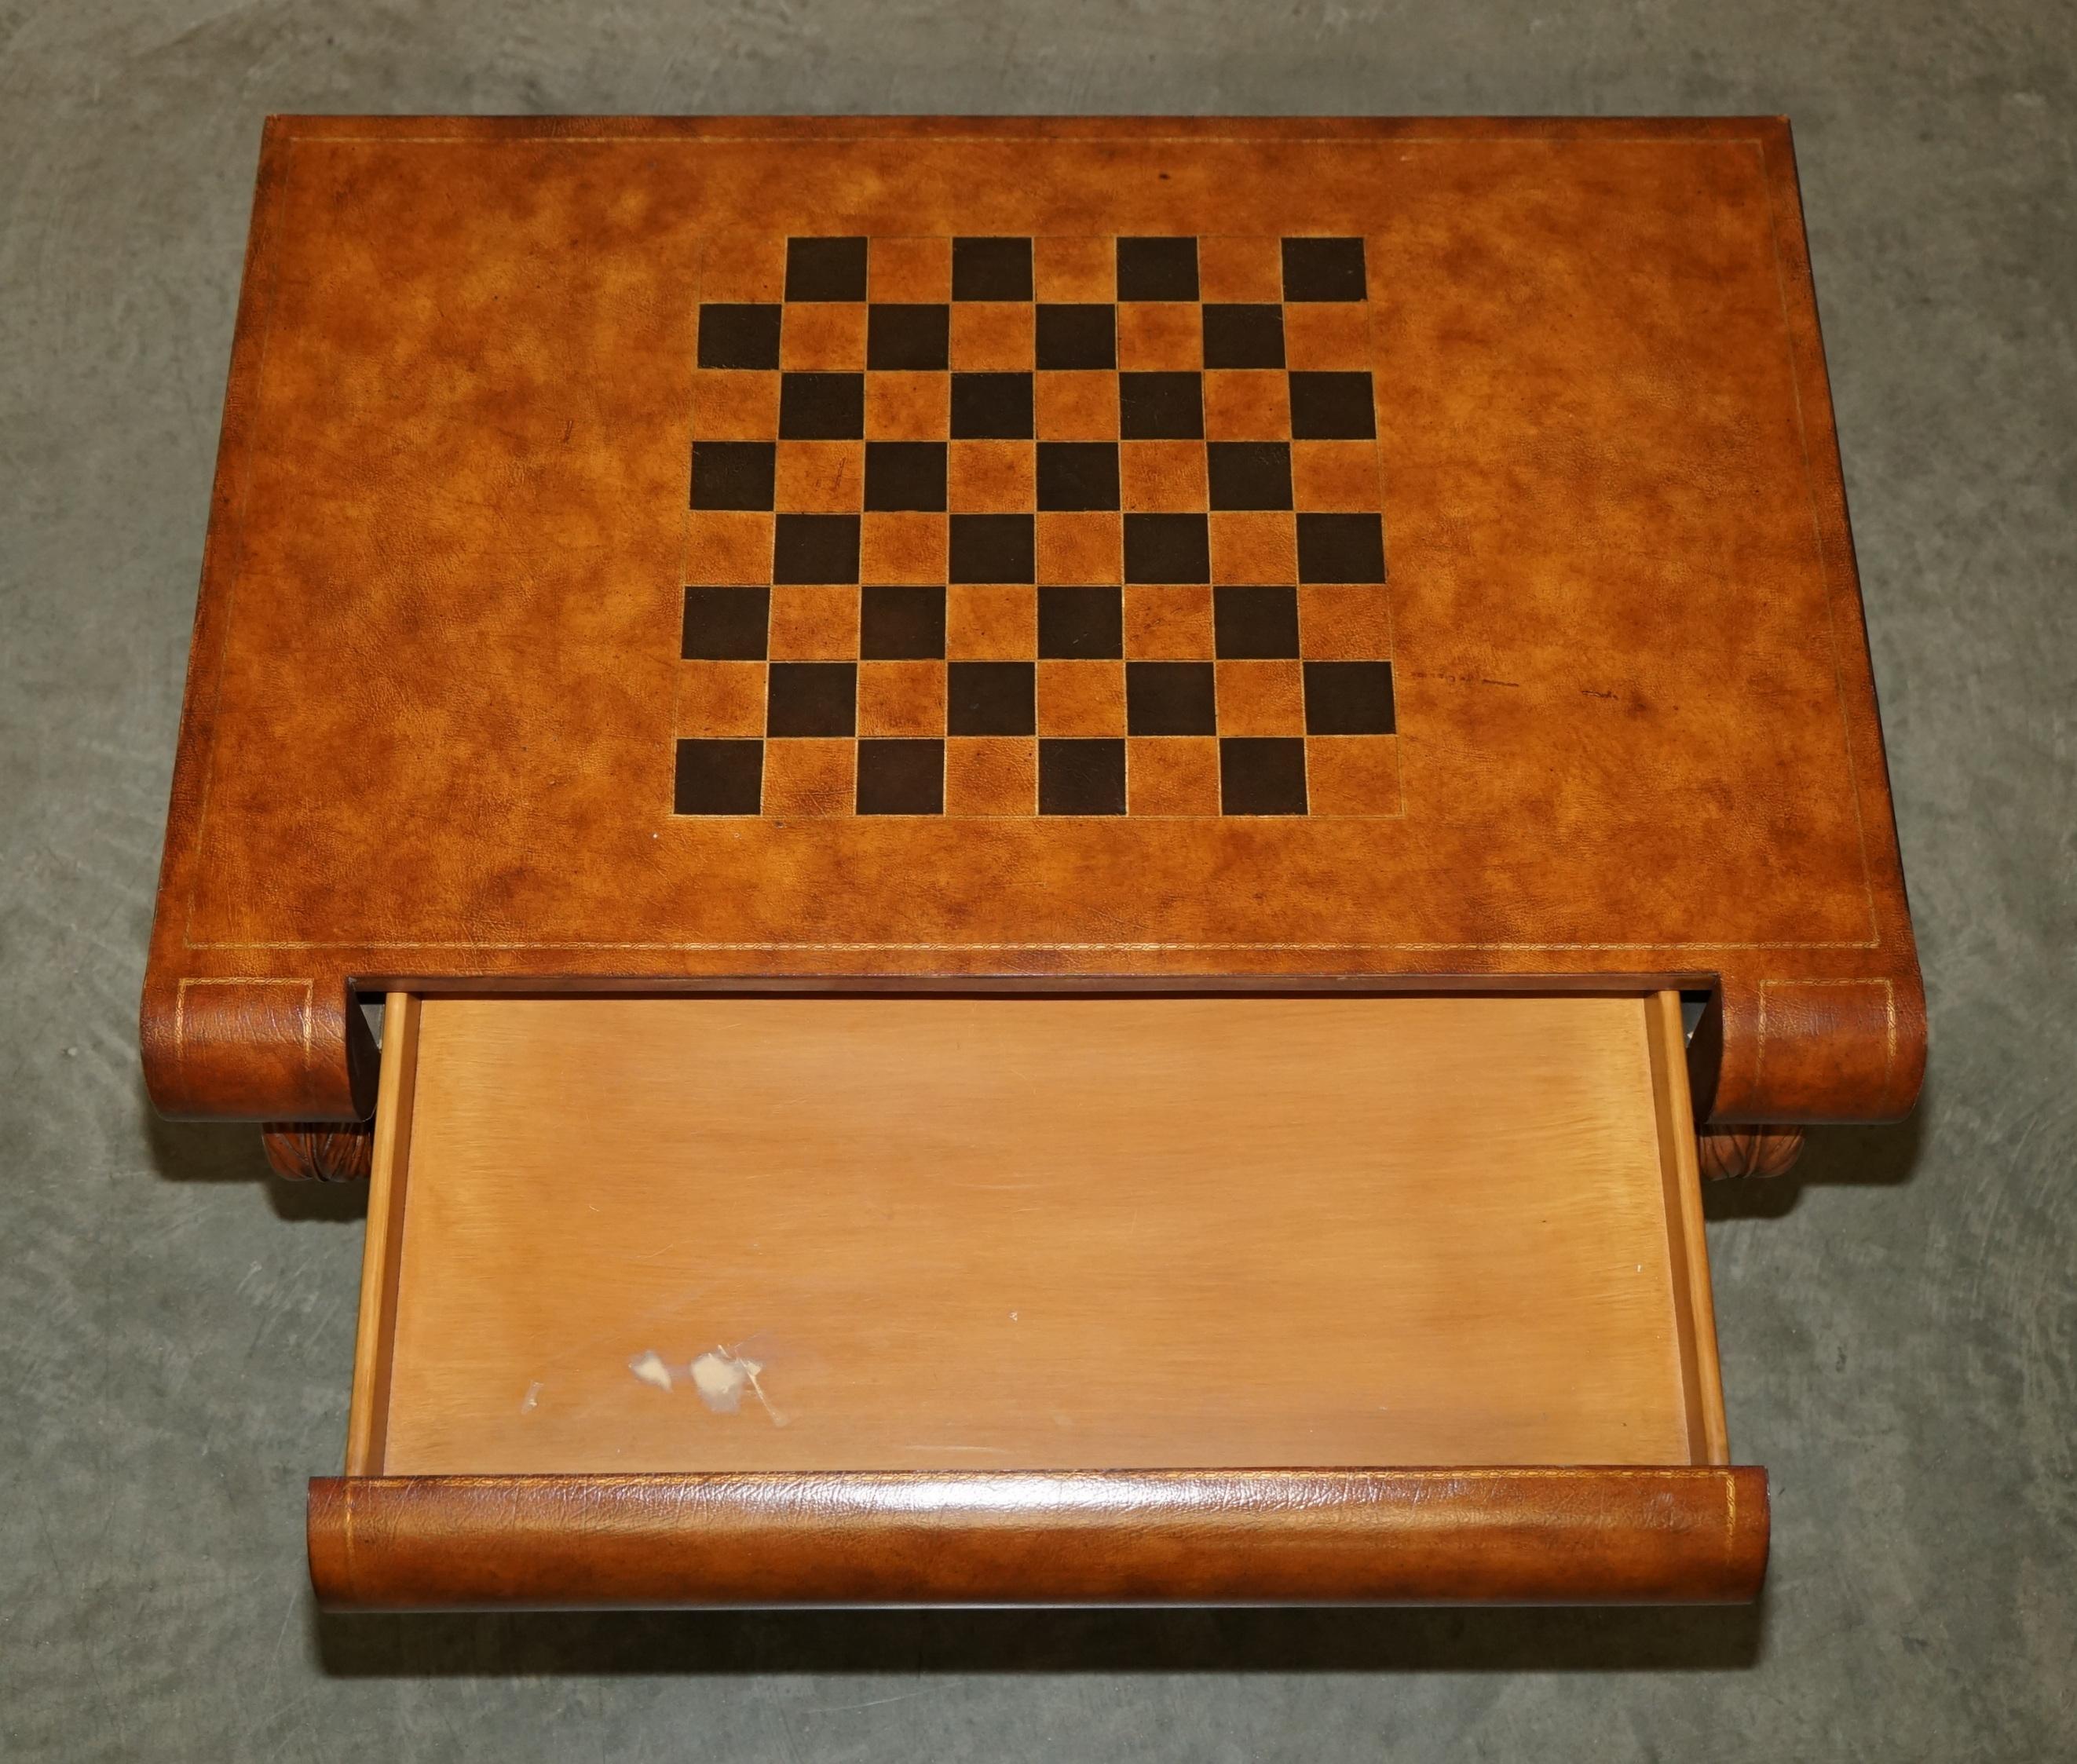 STUNNiNG HAND DYED BROWN LEATHER SCHOLARS BOOK CHESSBOARD CHESS COFFEE TABLE For Sale 9